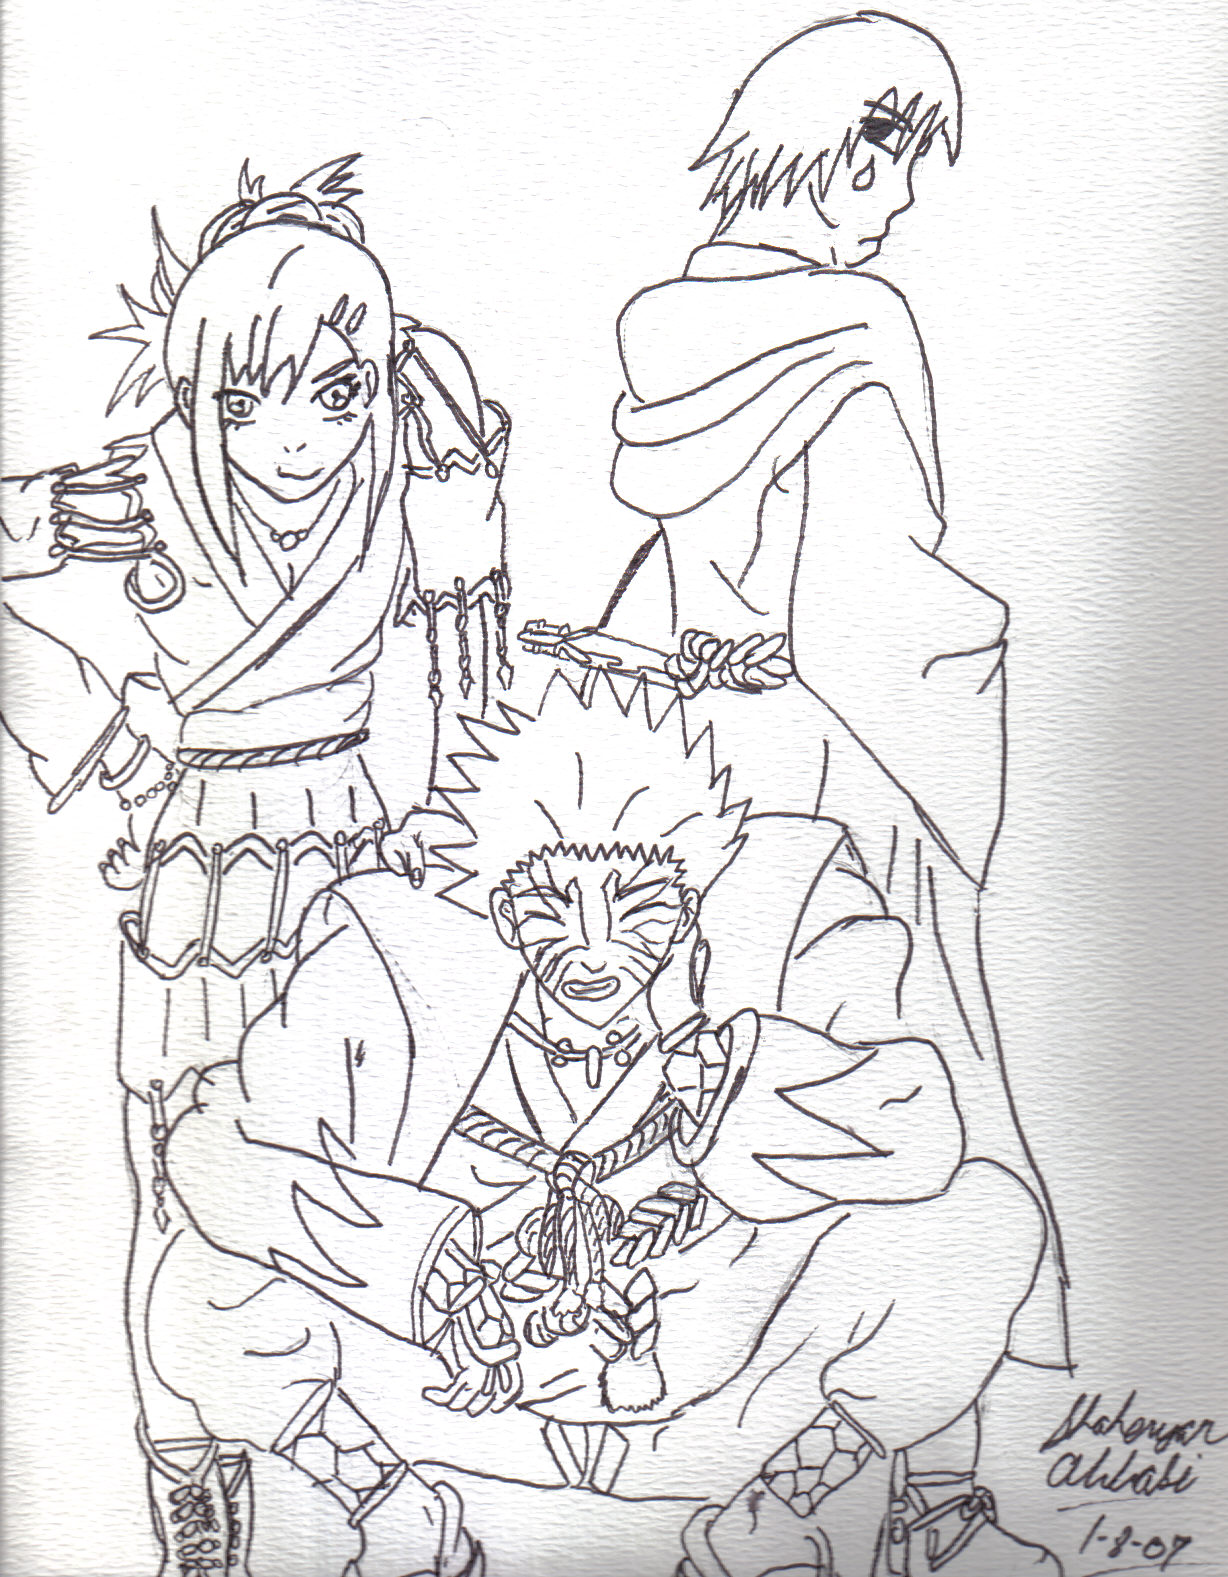 Naruto and Friends by HaRRyPoTTer45